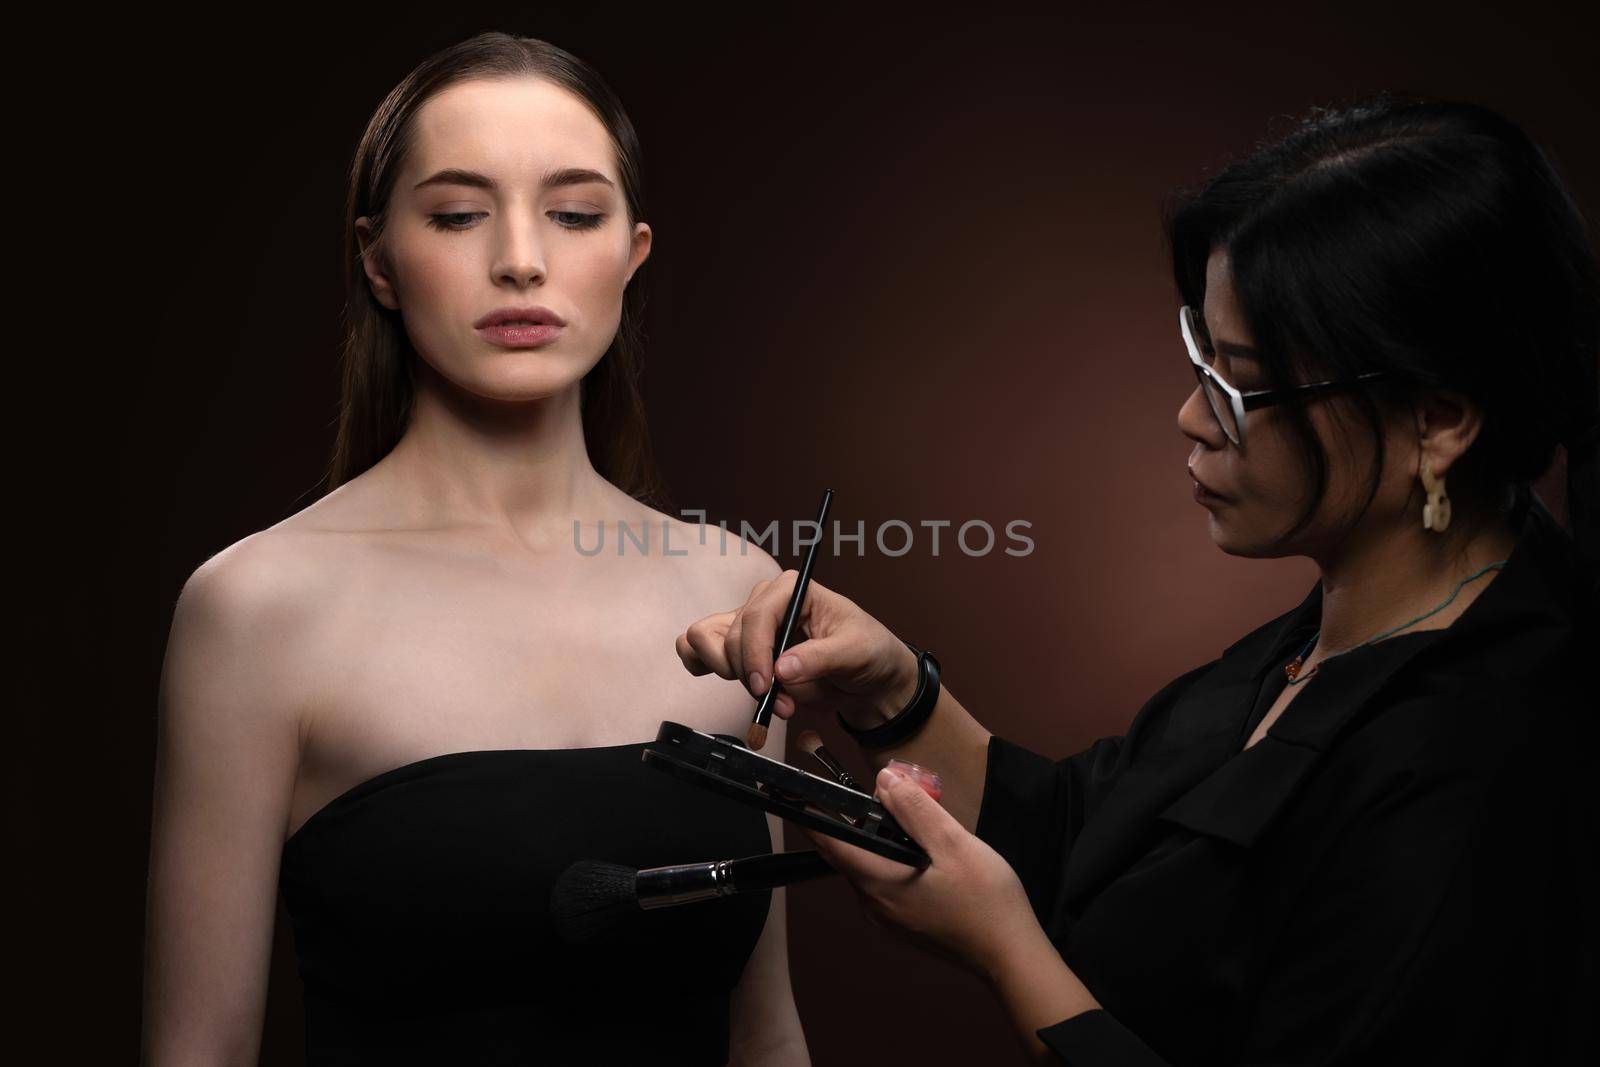 Beauty makeup artist working on a fashion model pretty face isolated on black background. Beautiful model at make up artist. Make-up artist, applying eye shadow to the model.